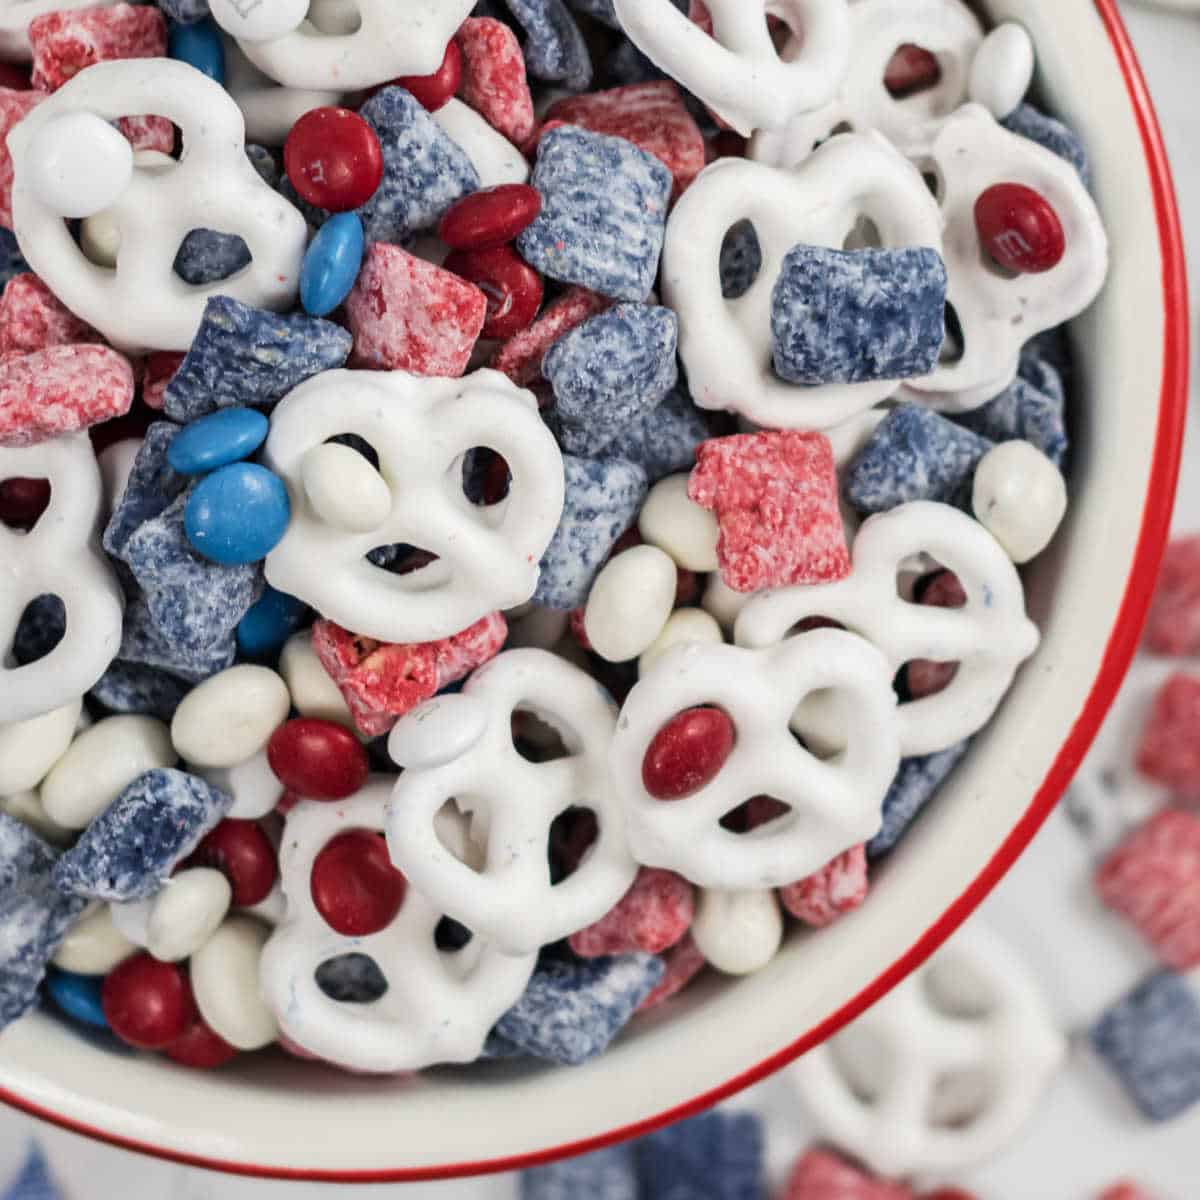 Red, White, and Blue Snack Mix